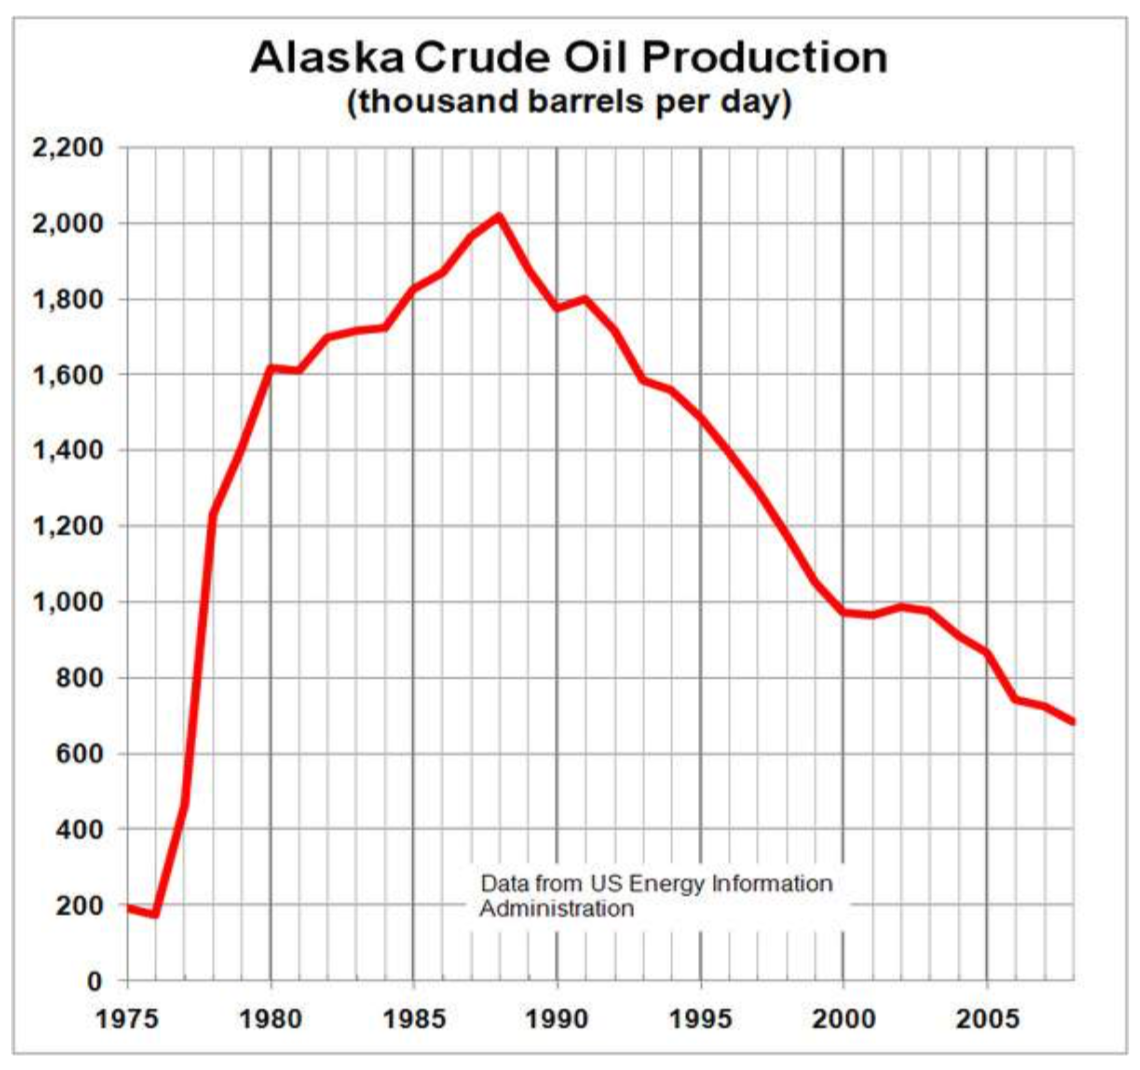 A graph labeled Alaska Crude Oil Production in thousands of barrels per day, with the horizontal axis showing years from 1975 to 2008, and the vertical axis from 0 to 2200.  The graph starts in 1975 around 200, drops a little to about 180, increases up to about 2010 in 1988, then drops to about 700 in 2008.